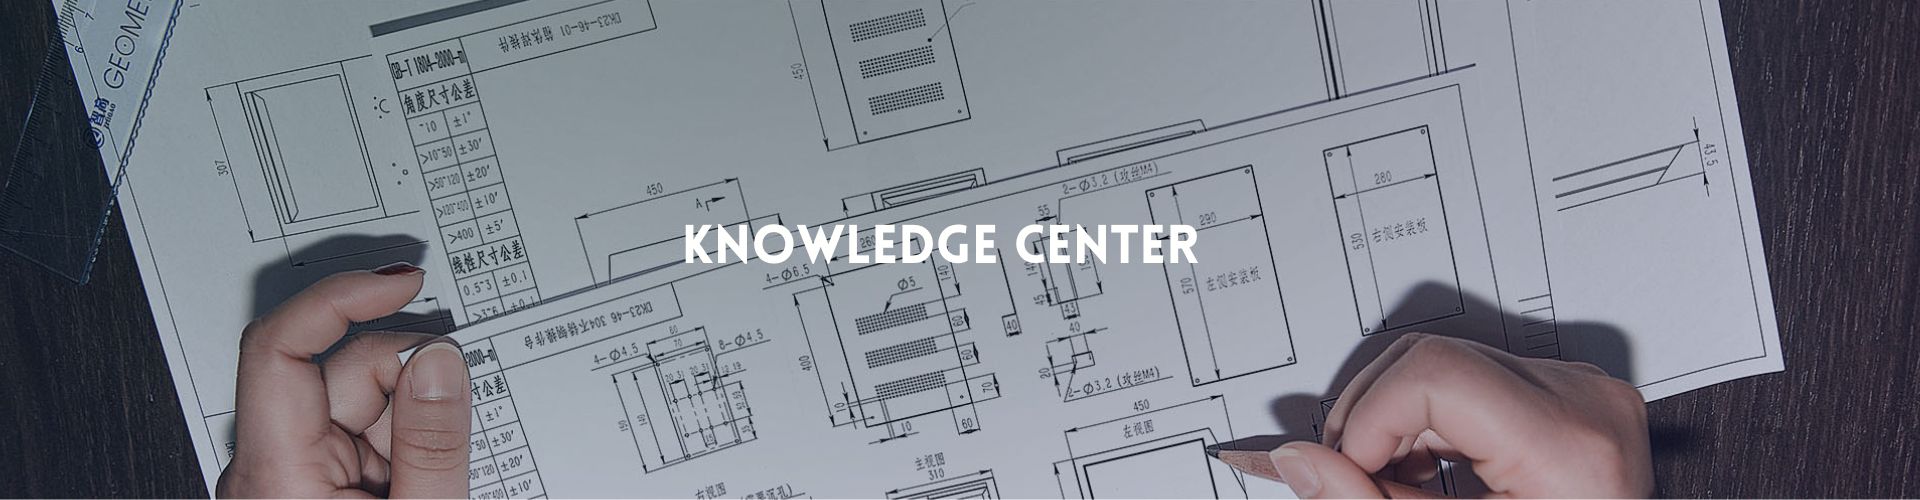 Knowledge Center for sheet metal fabrication